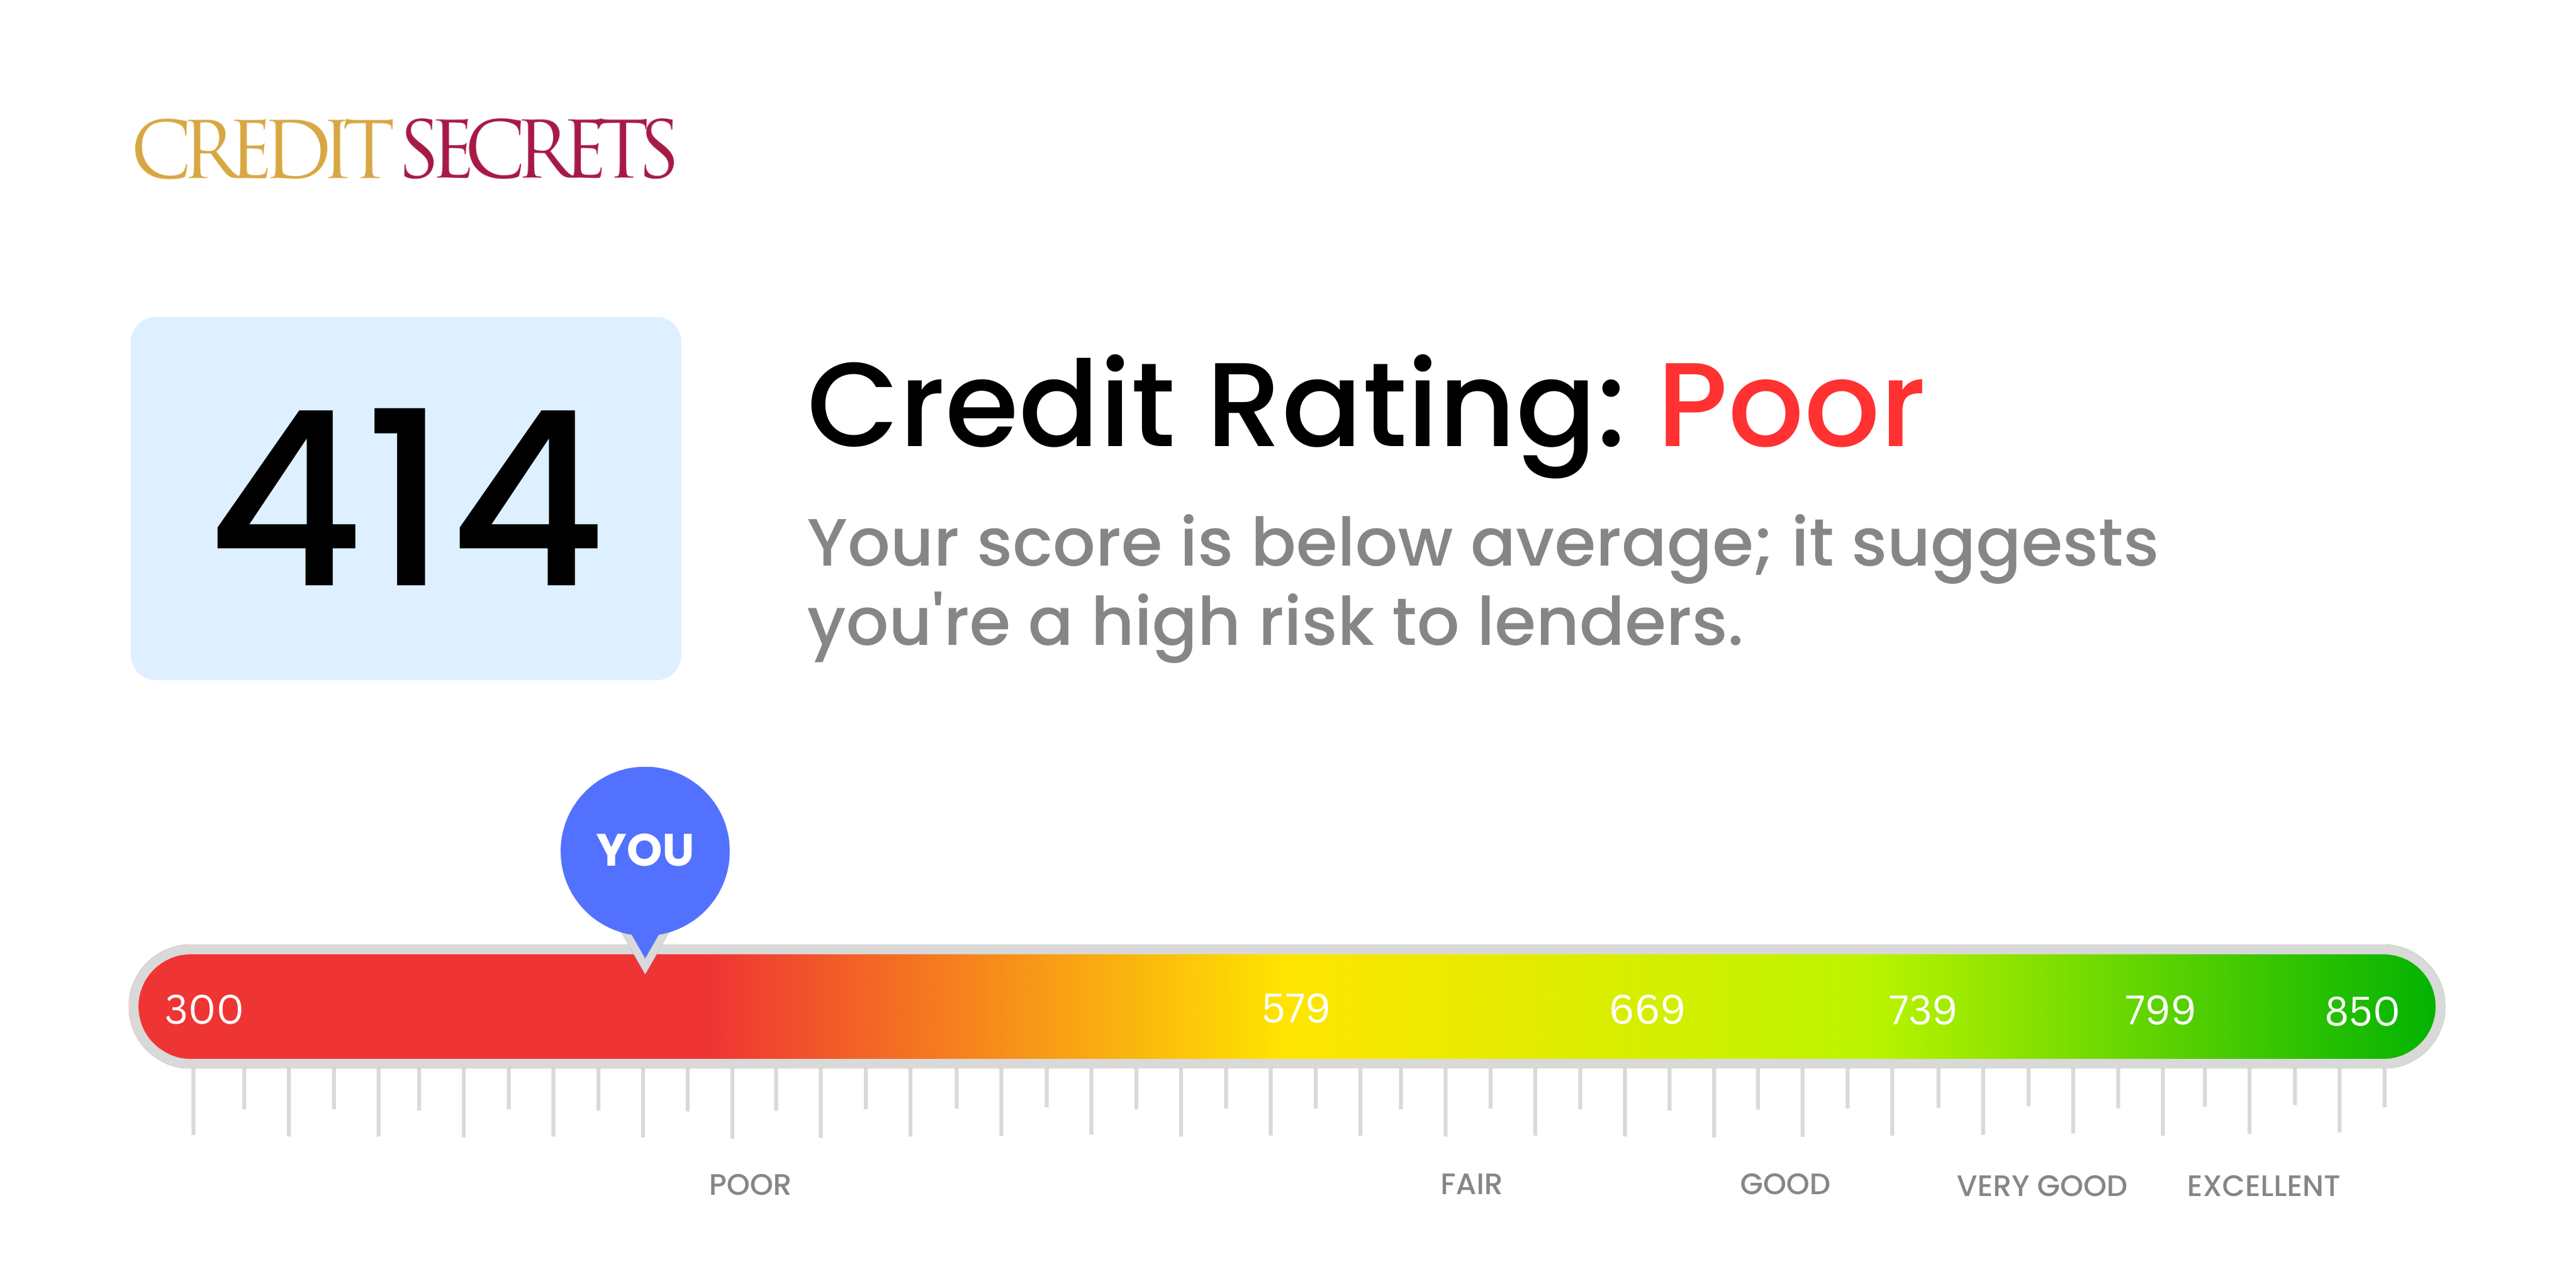 Is 414 a good credit score?